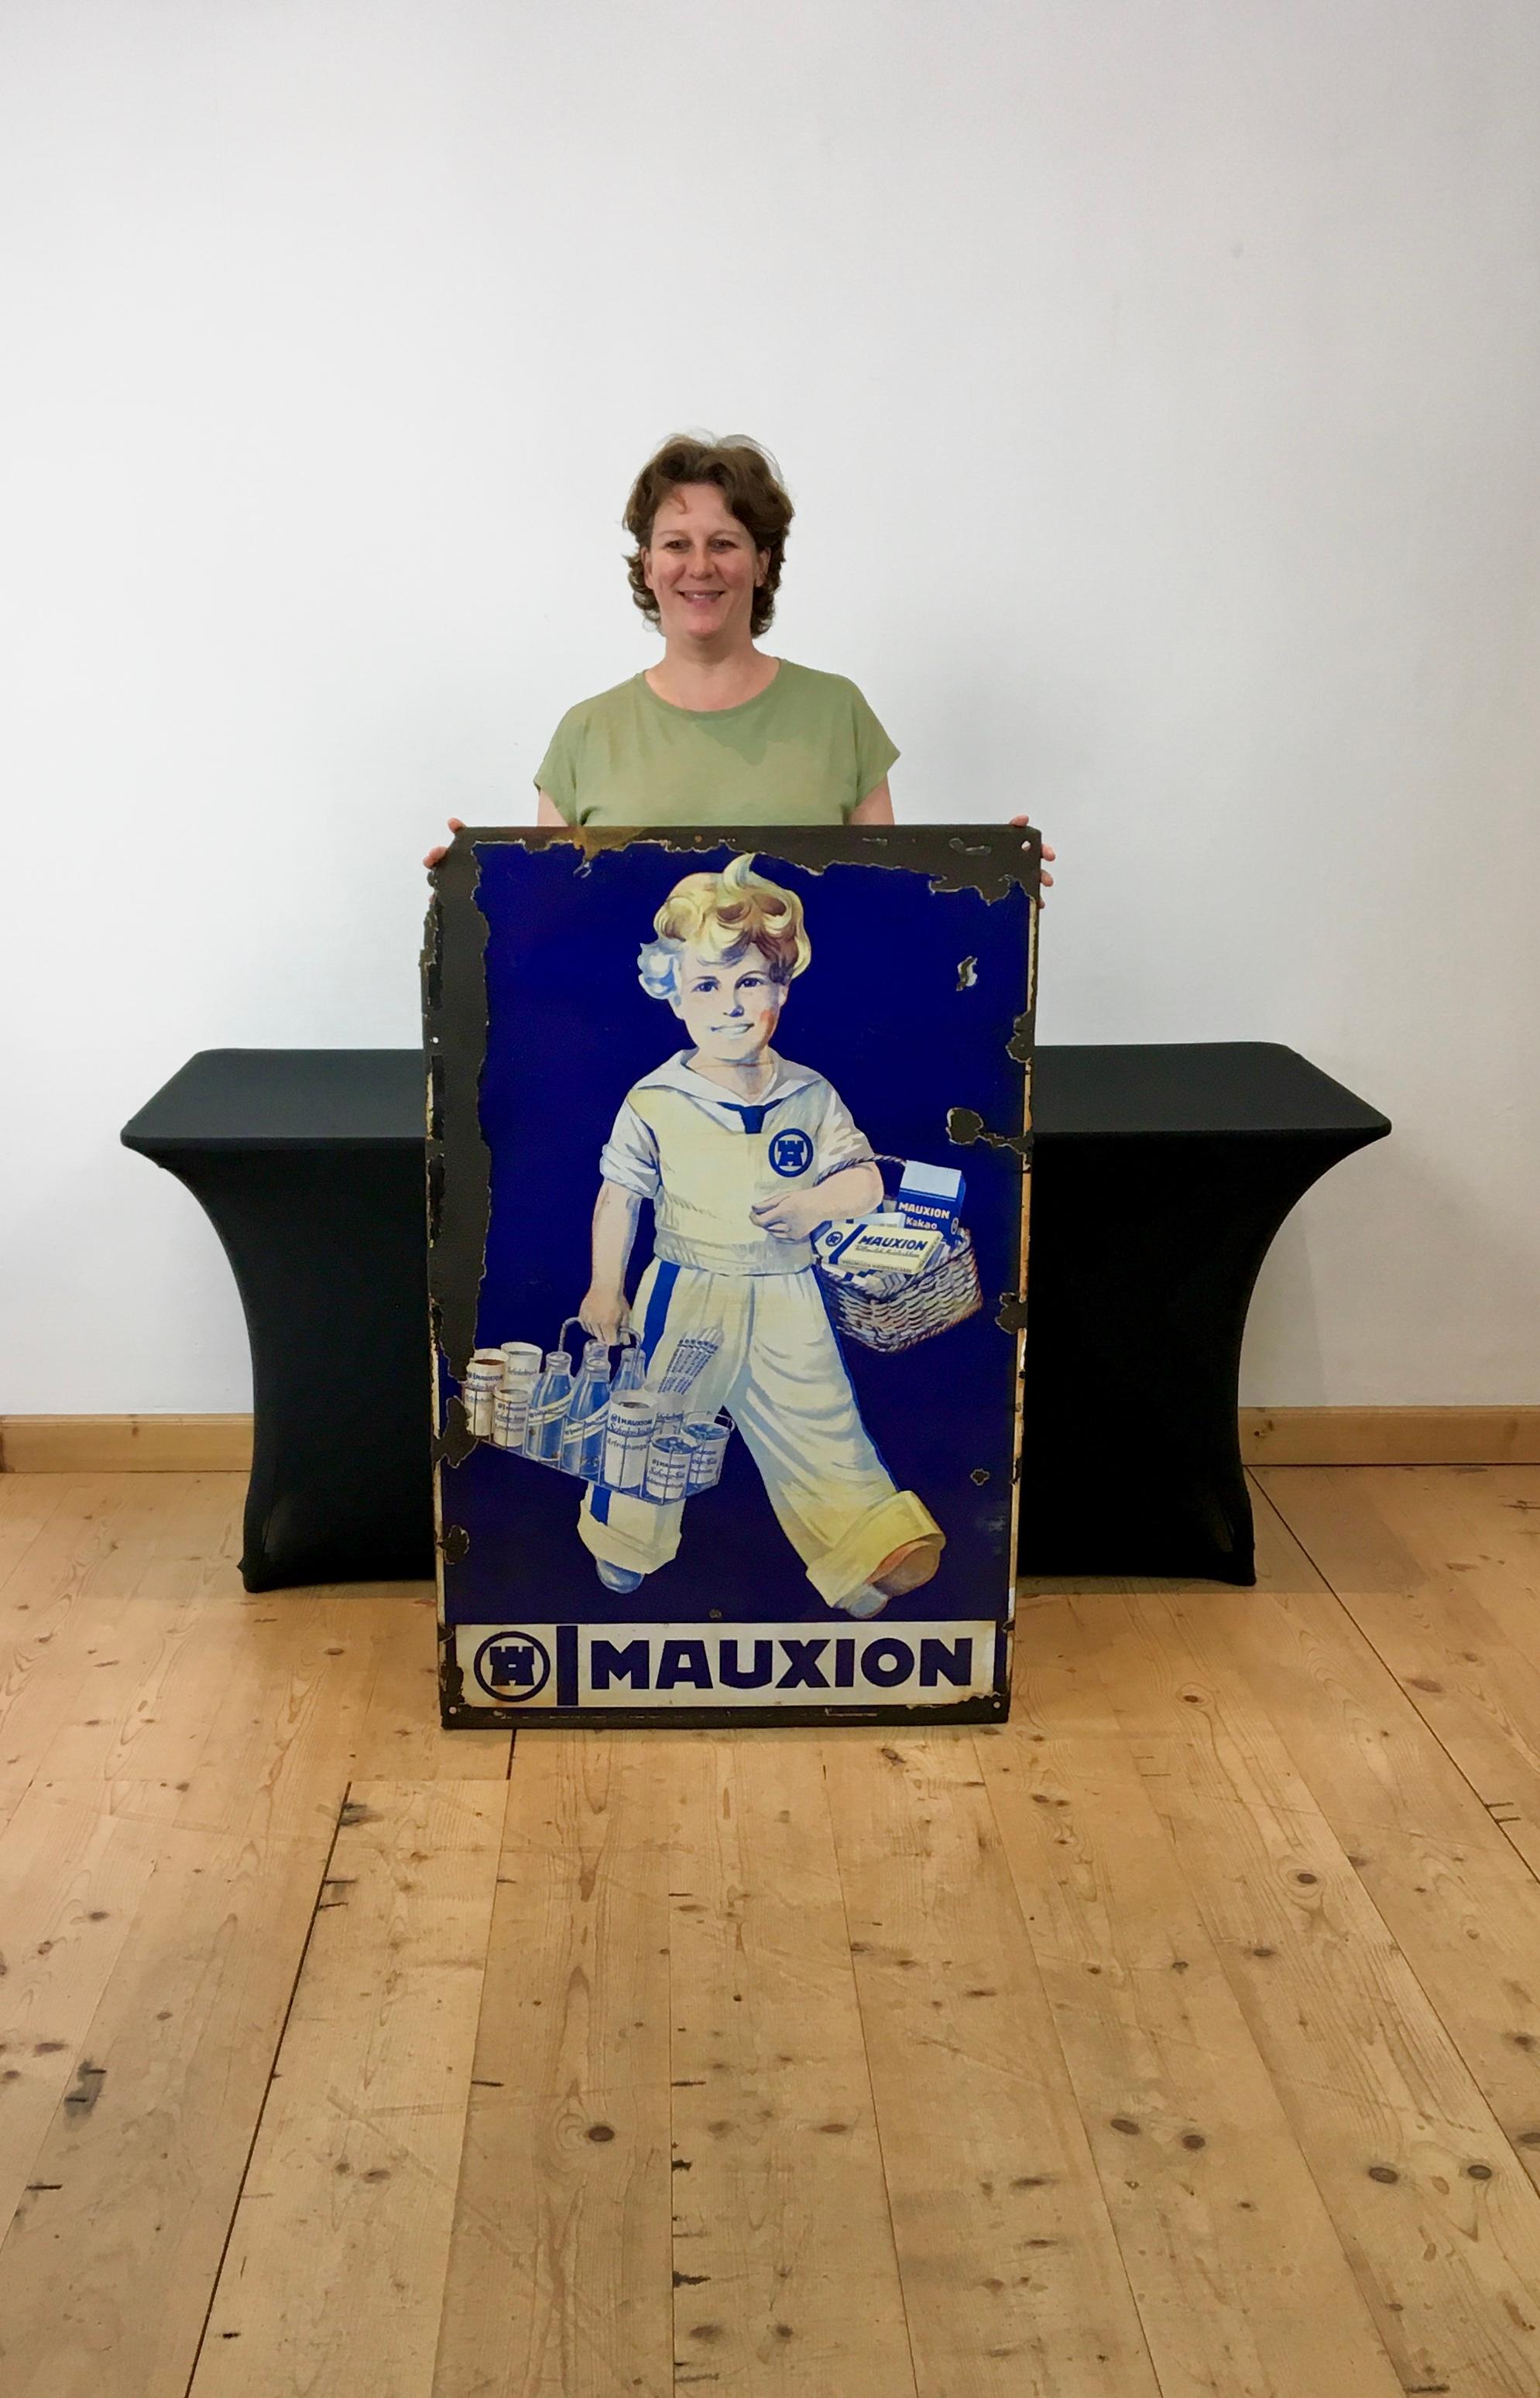 Large porcelain sign for Mauxion Chocolat Products circa 1925. 
Antique porcelain sign - enamelled sign - advertising wall sign. 
This spectacular enamel sign was designed by Wilhelm Defke 
for the German company Mauxion which was founded in 1855